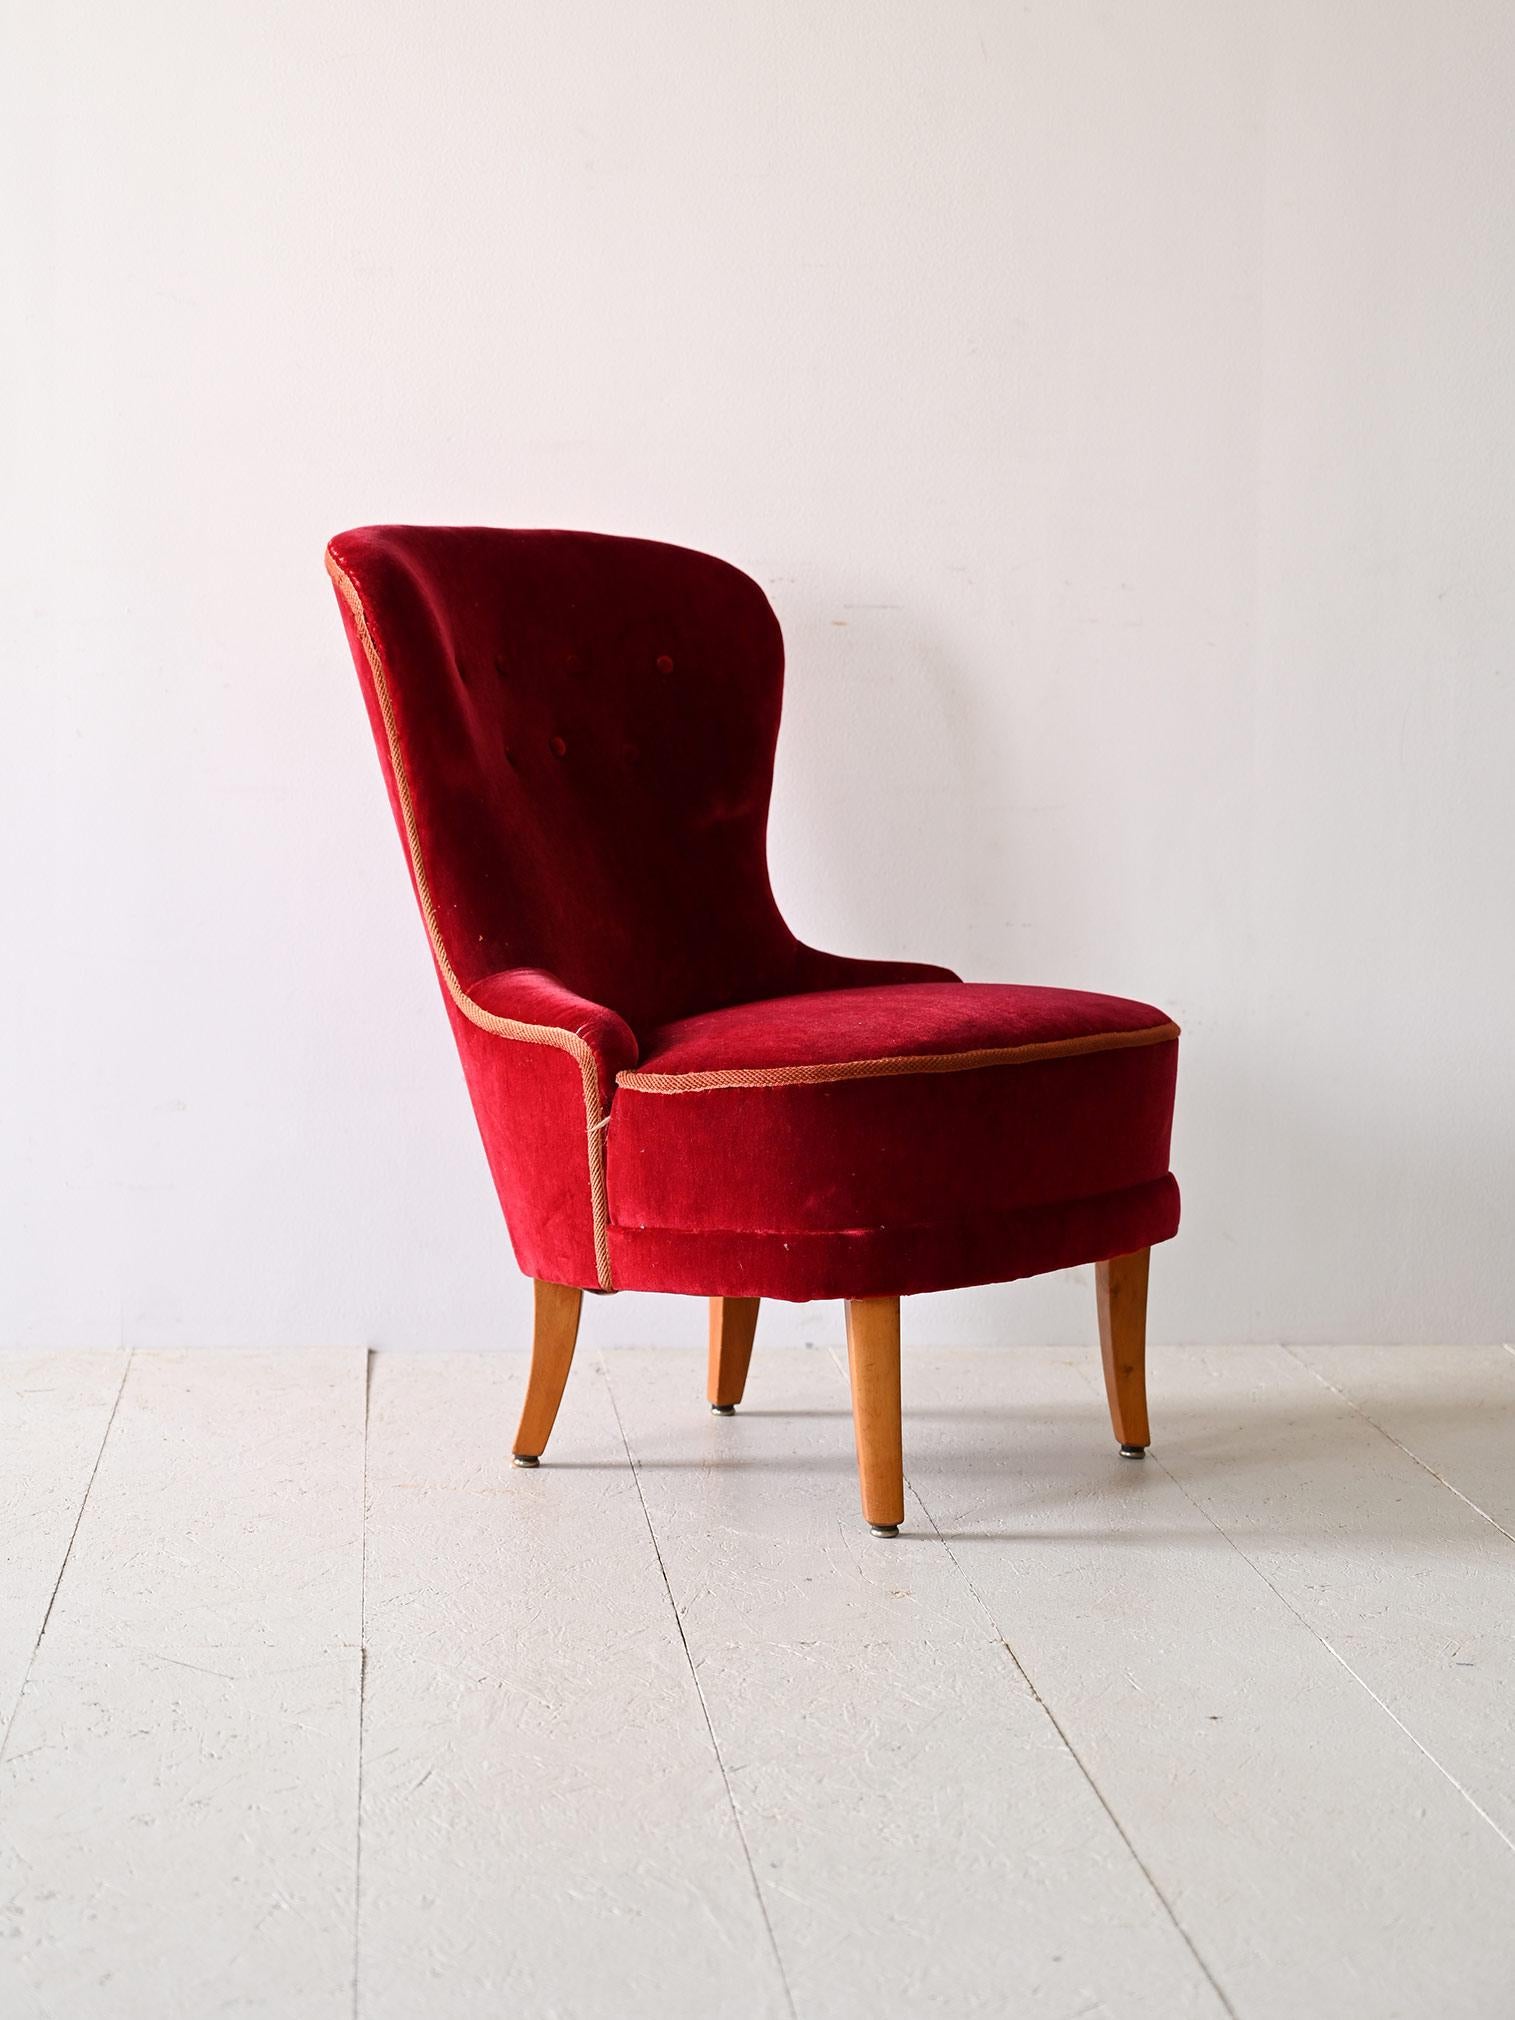 Vintage red velvet armchair.

This red-colored velvet armchair embodies the elegance and sophistication of the Scandinavian style of the 1940s. Its tapered legs add a light, modern touch to the structure, while the slightly curved features give the